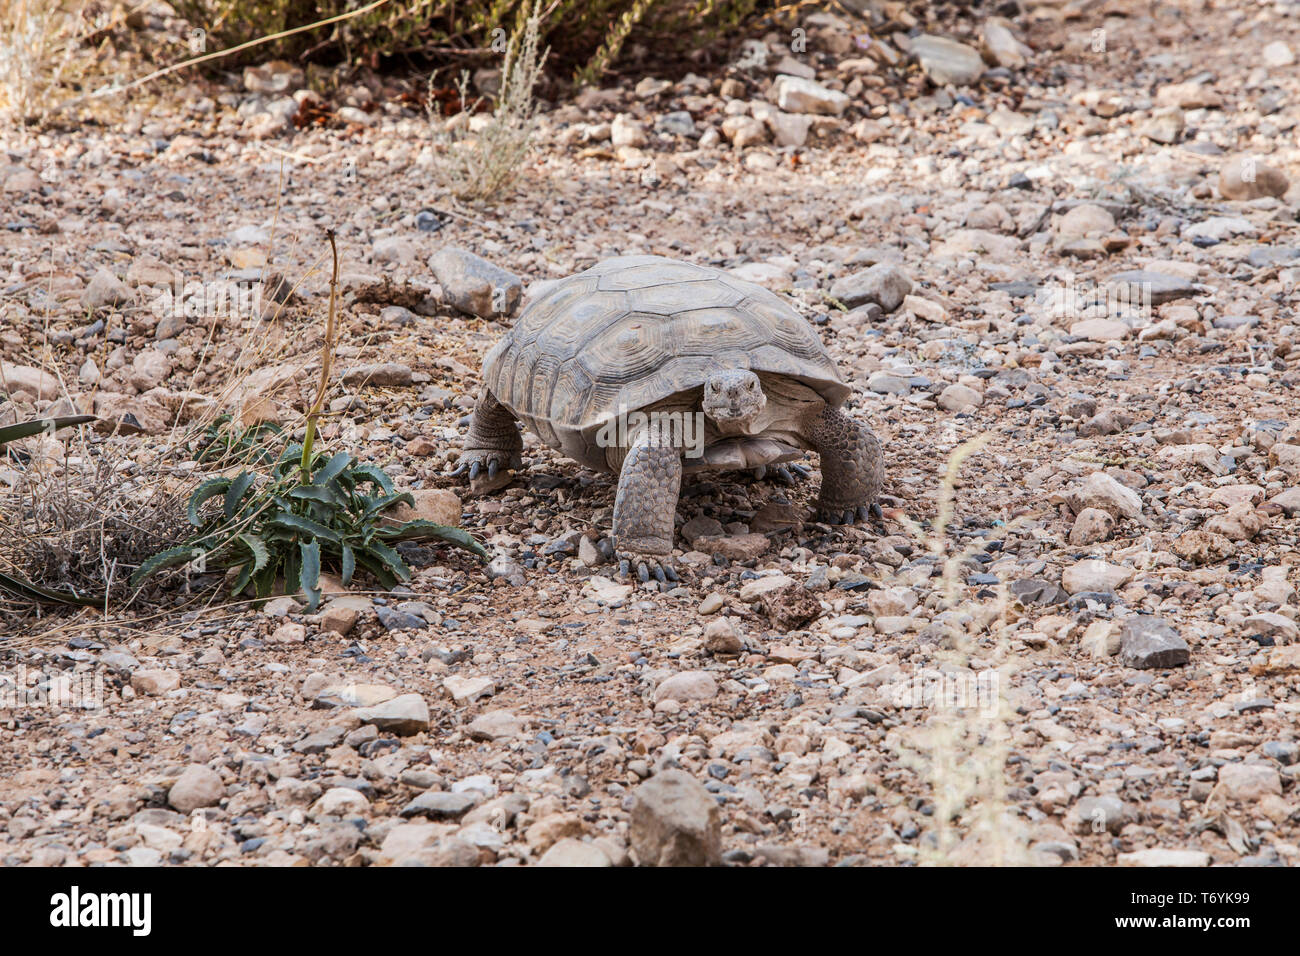 A desert tortoise at the interpretive center, Red Rock Canyons Conservation Area, Nevada, USA Stock Photo